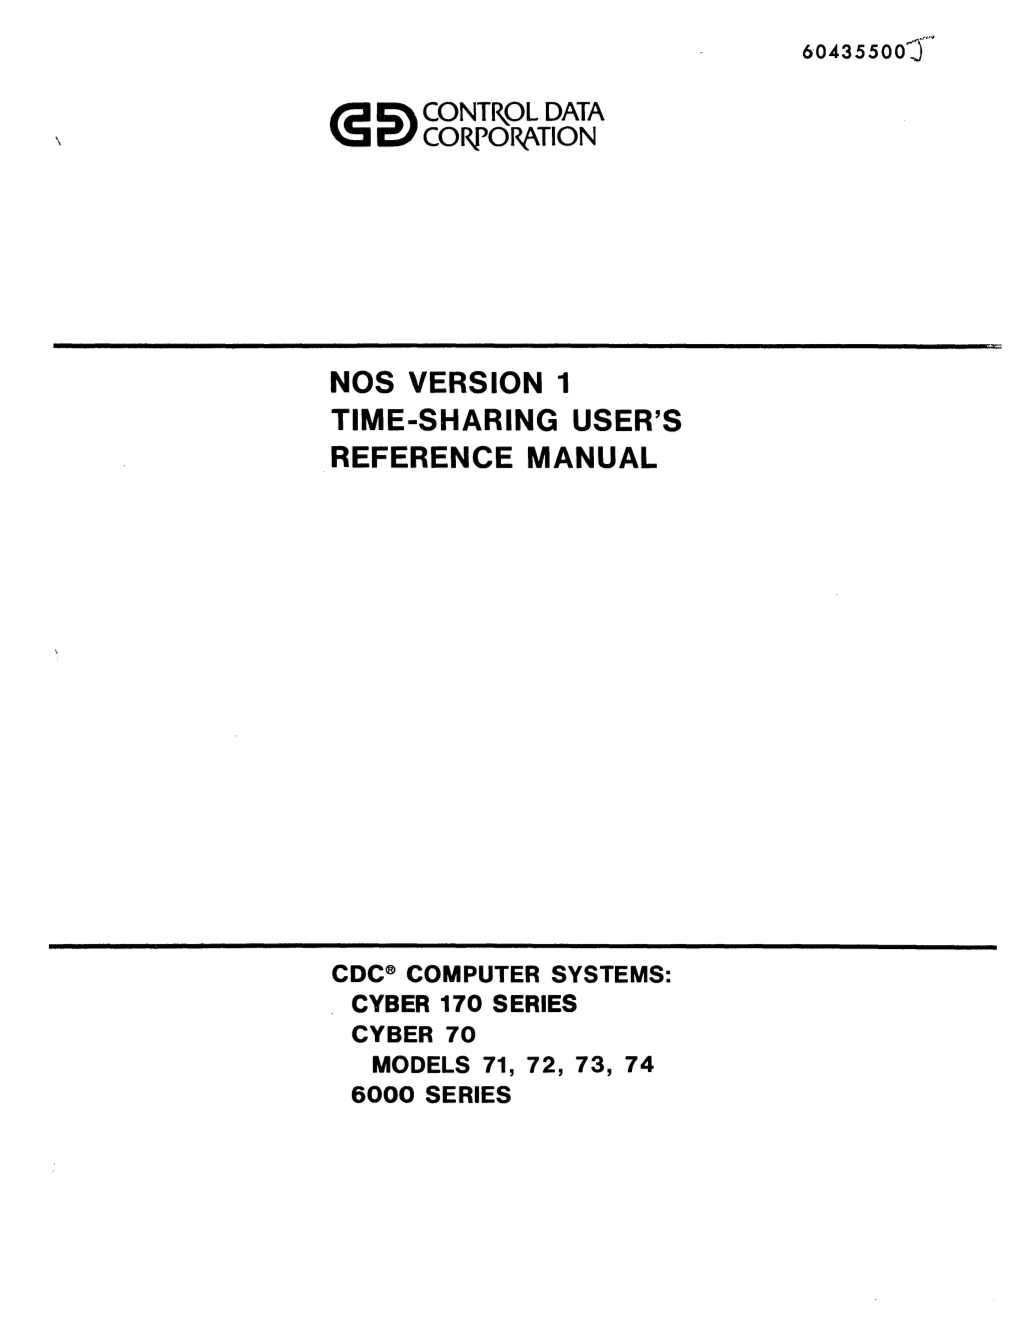 Nos Version 1 Time-Sharing User's Reference Manual